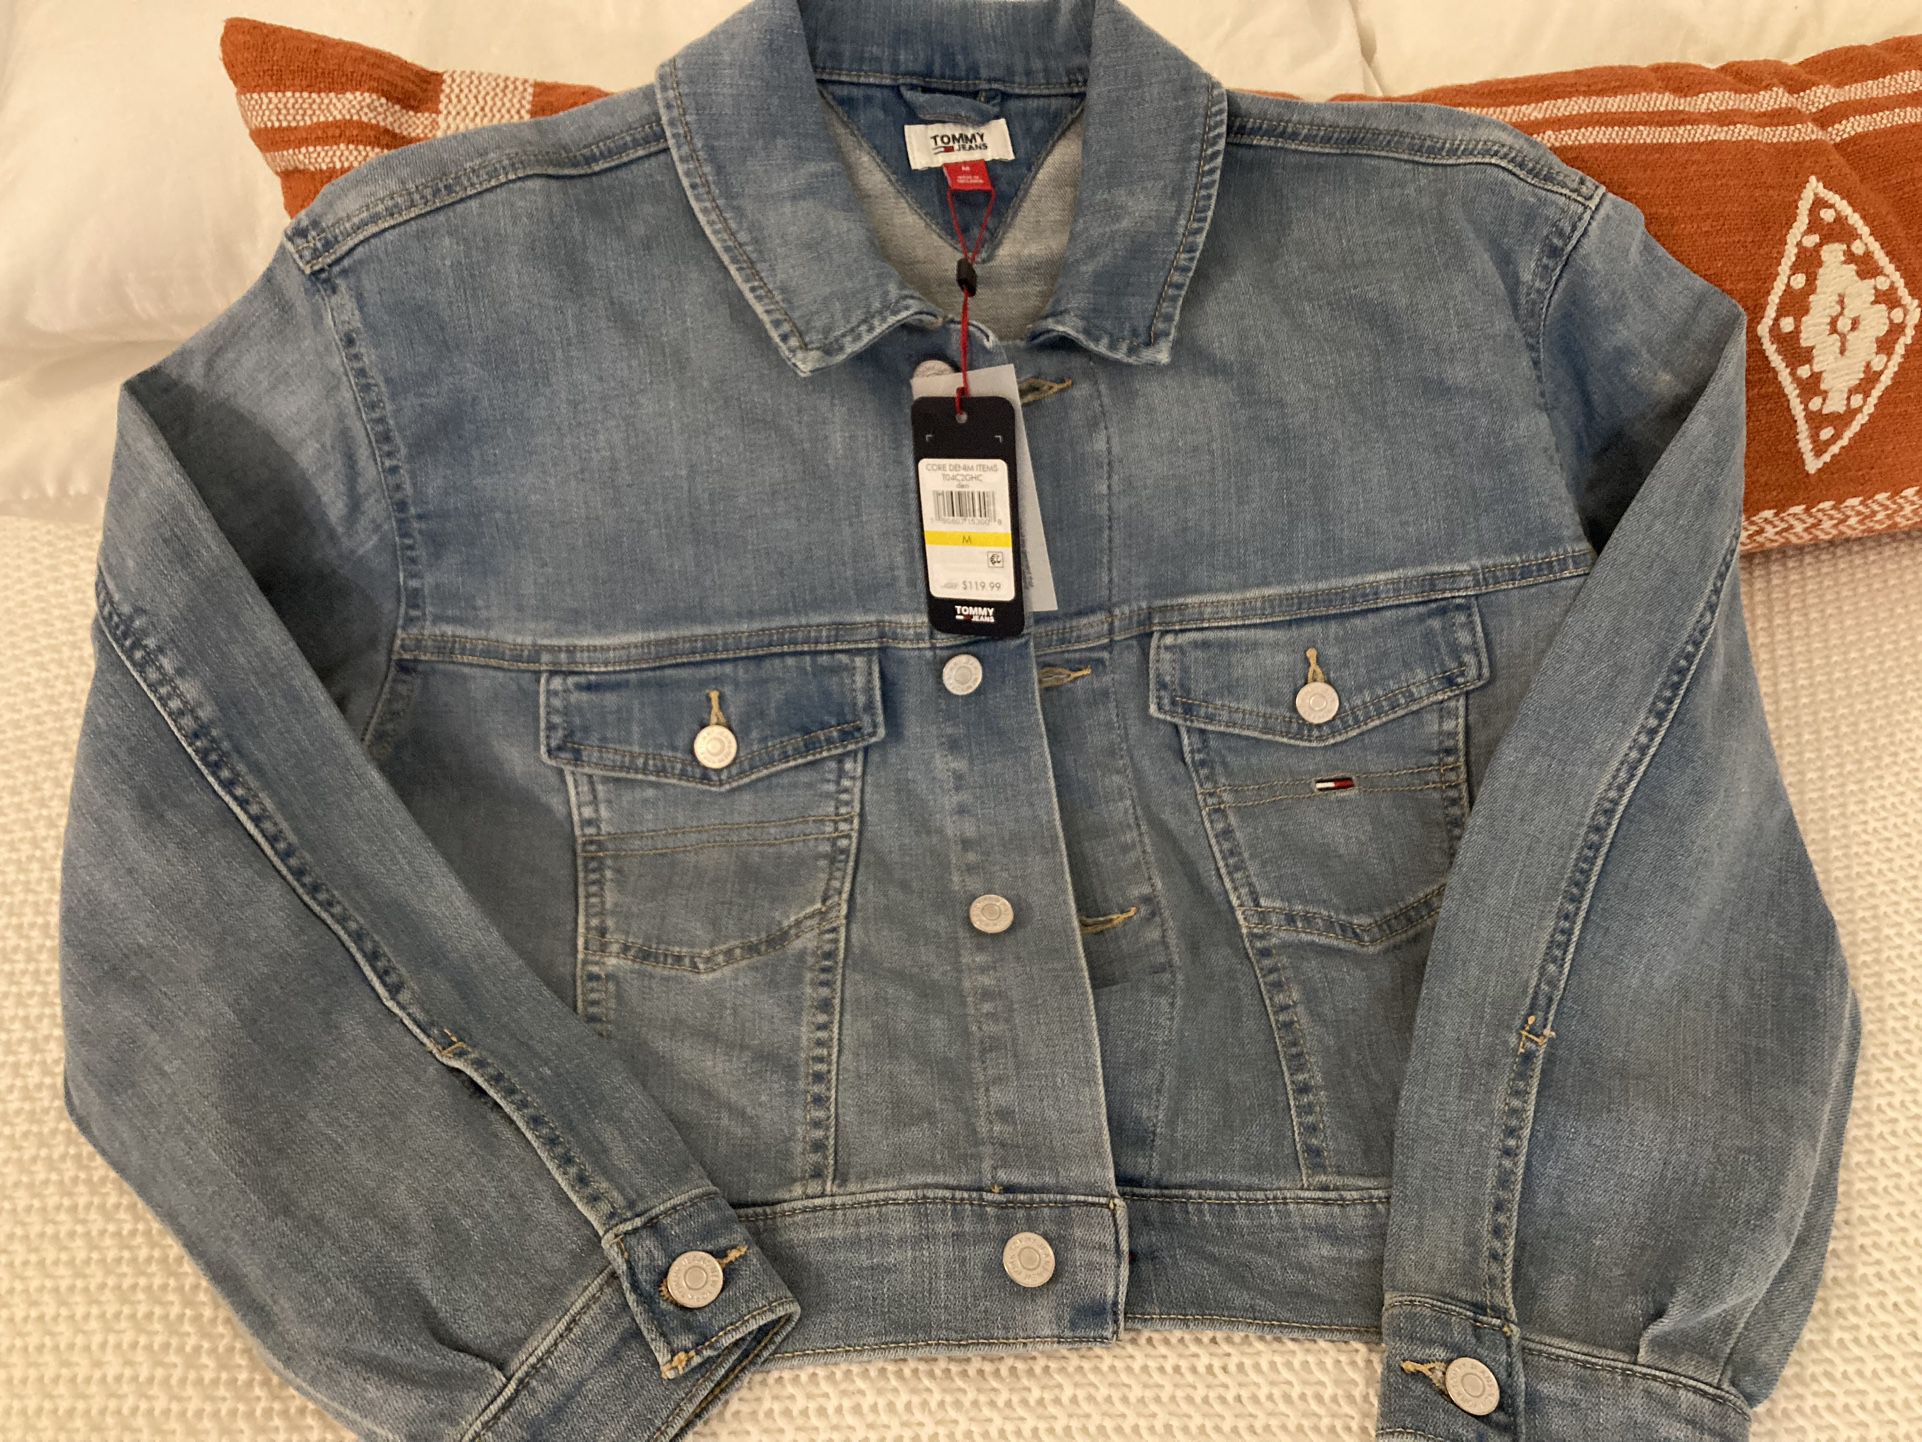 Hilfiger Jacket Size Medium for Sale in Bronx, NY - OfferUp